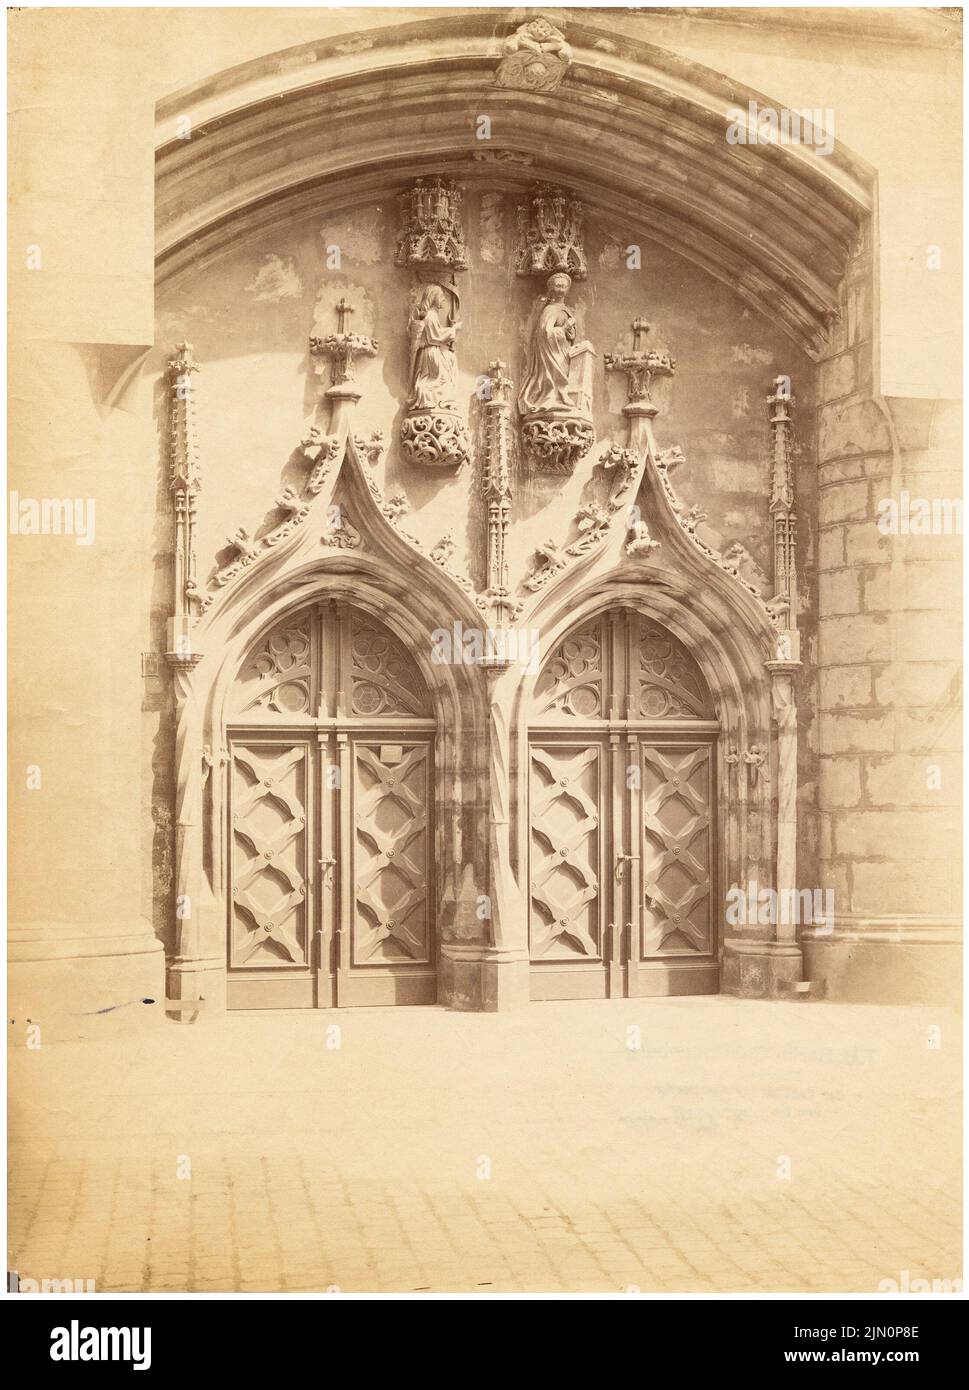 Scholz Robert, church portal of the Frauenkirche, Görlitz (without dat.): View of the west portal, two Gothic double doors with richly decorated walls and blinded keel arch, plastic jewelry. Photo, 27.3 x 20.4 cm (including scan edges) Scholz Robert: Kirchenportal der Frauenkirche, Görlitz (ohne Dat.) Stock Photo